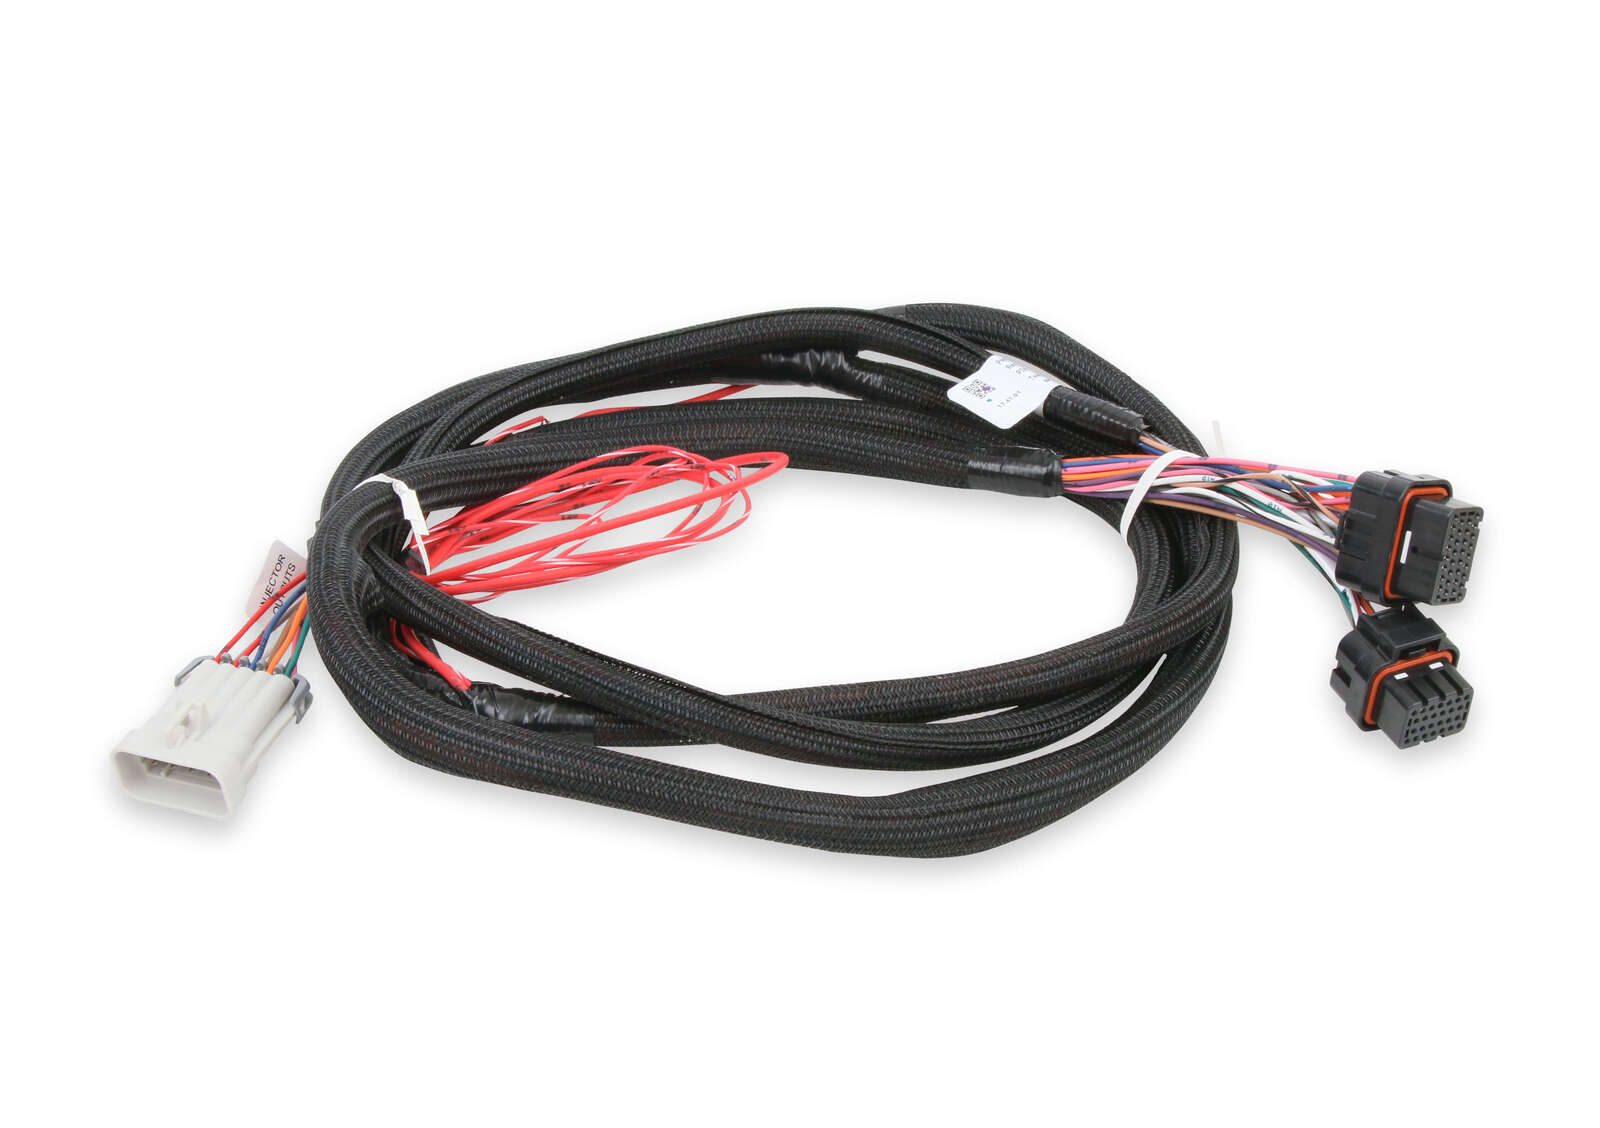 Holley EFI Fuel Injection Wire Harness, Multi-Port, Mass Airflow, Each